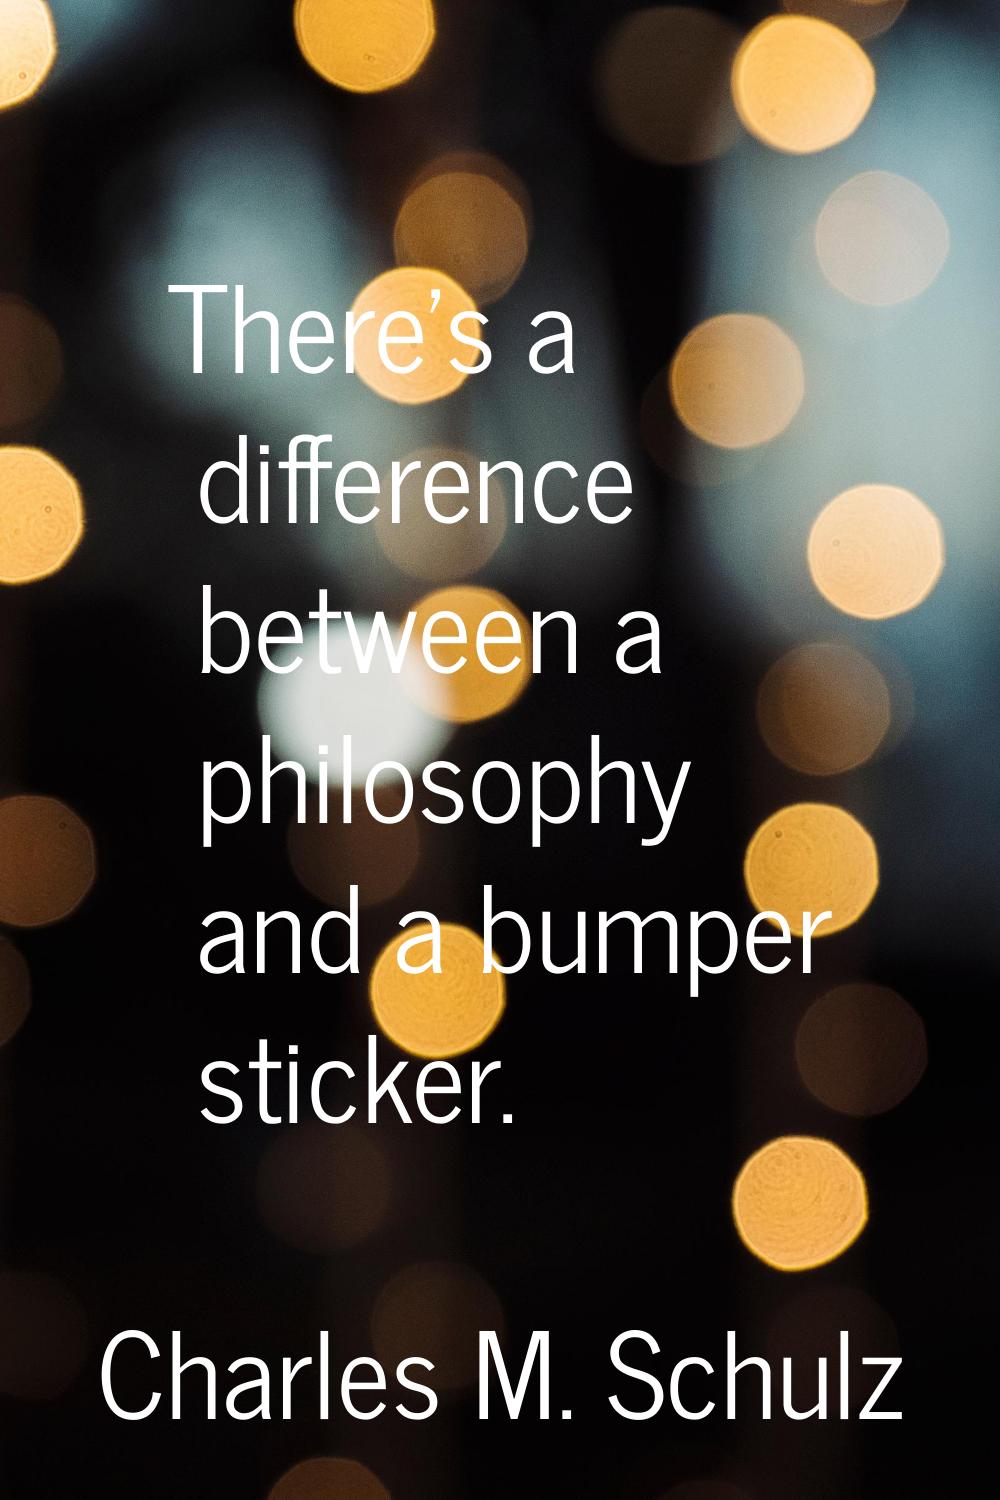 There's a difference between a philosophy and a bumper sticker.